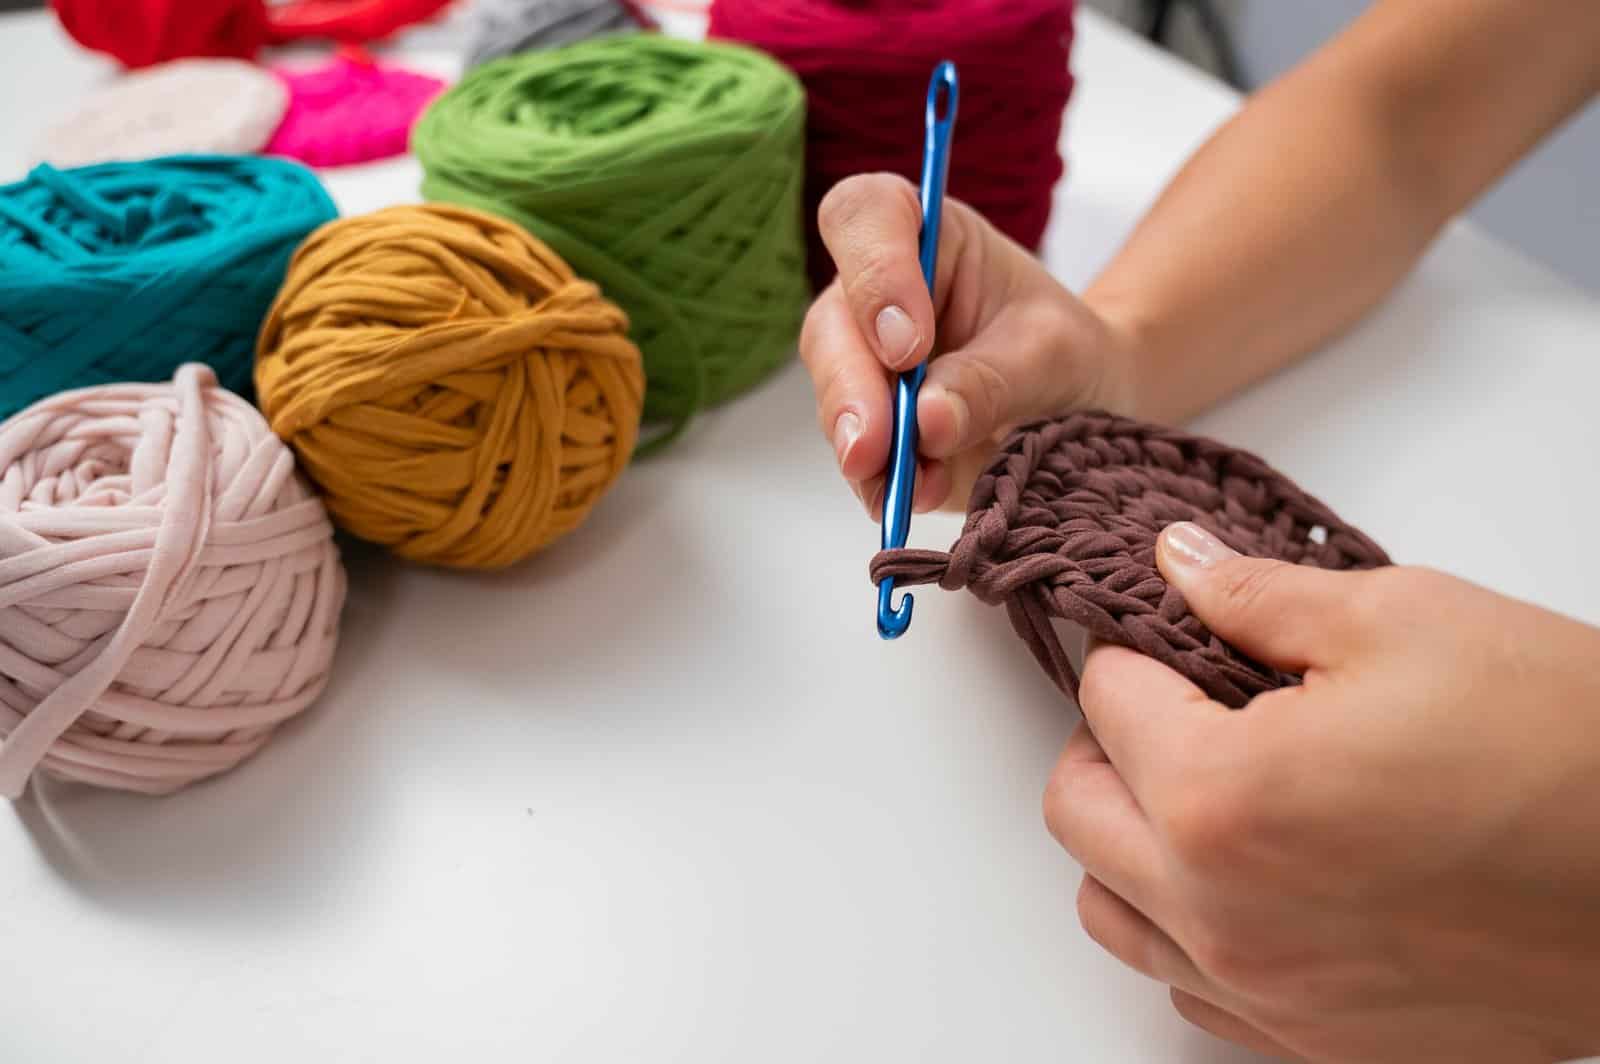 Crocheting is not just a hobby but also a treatment